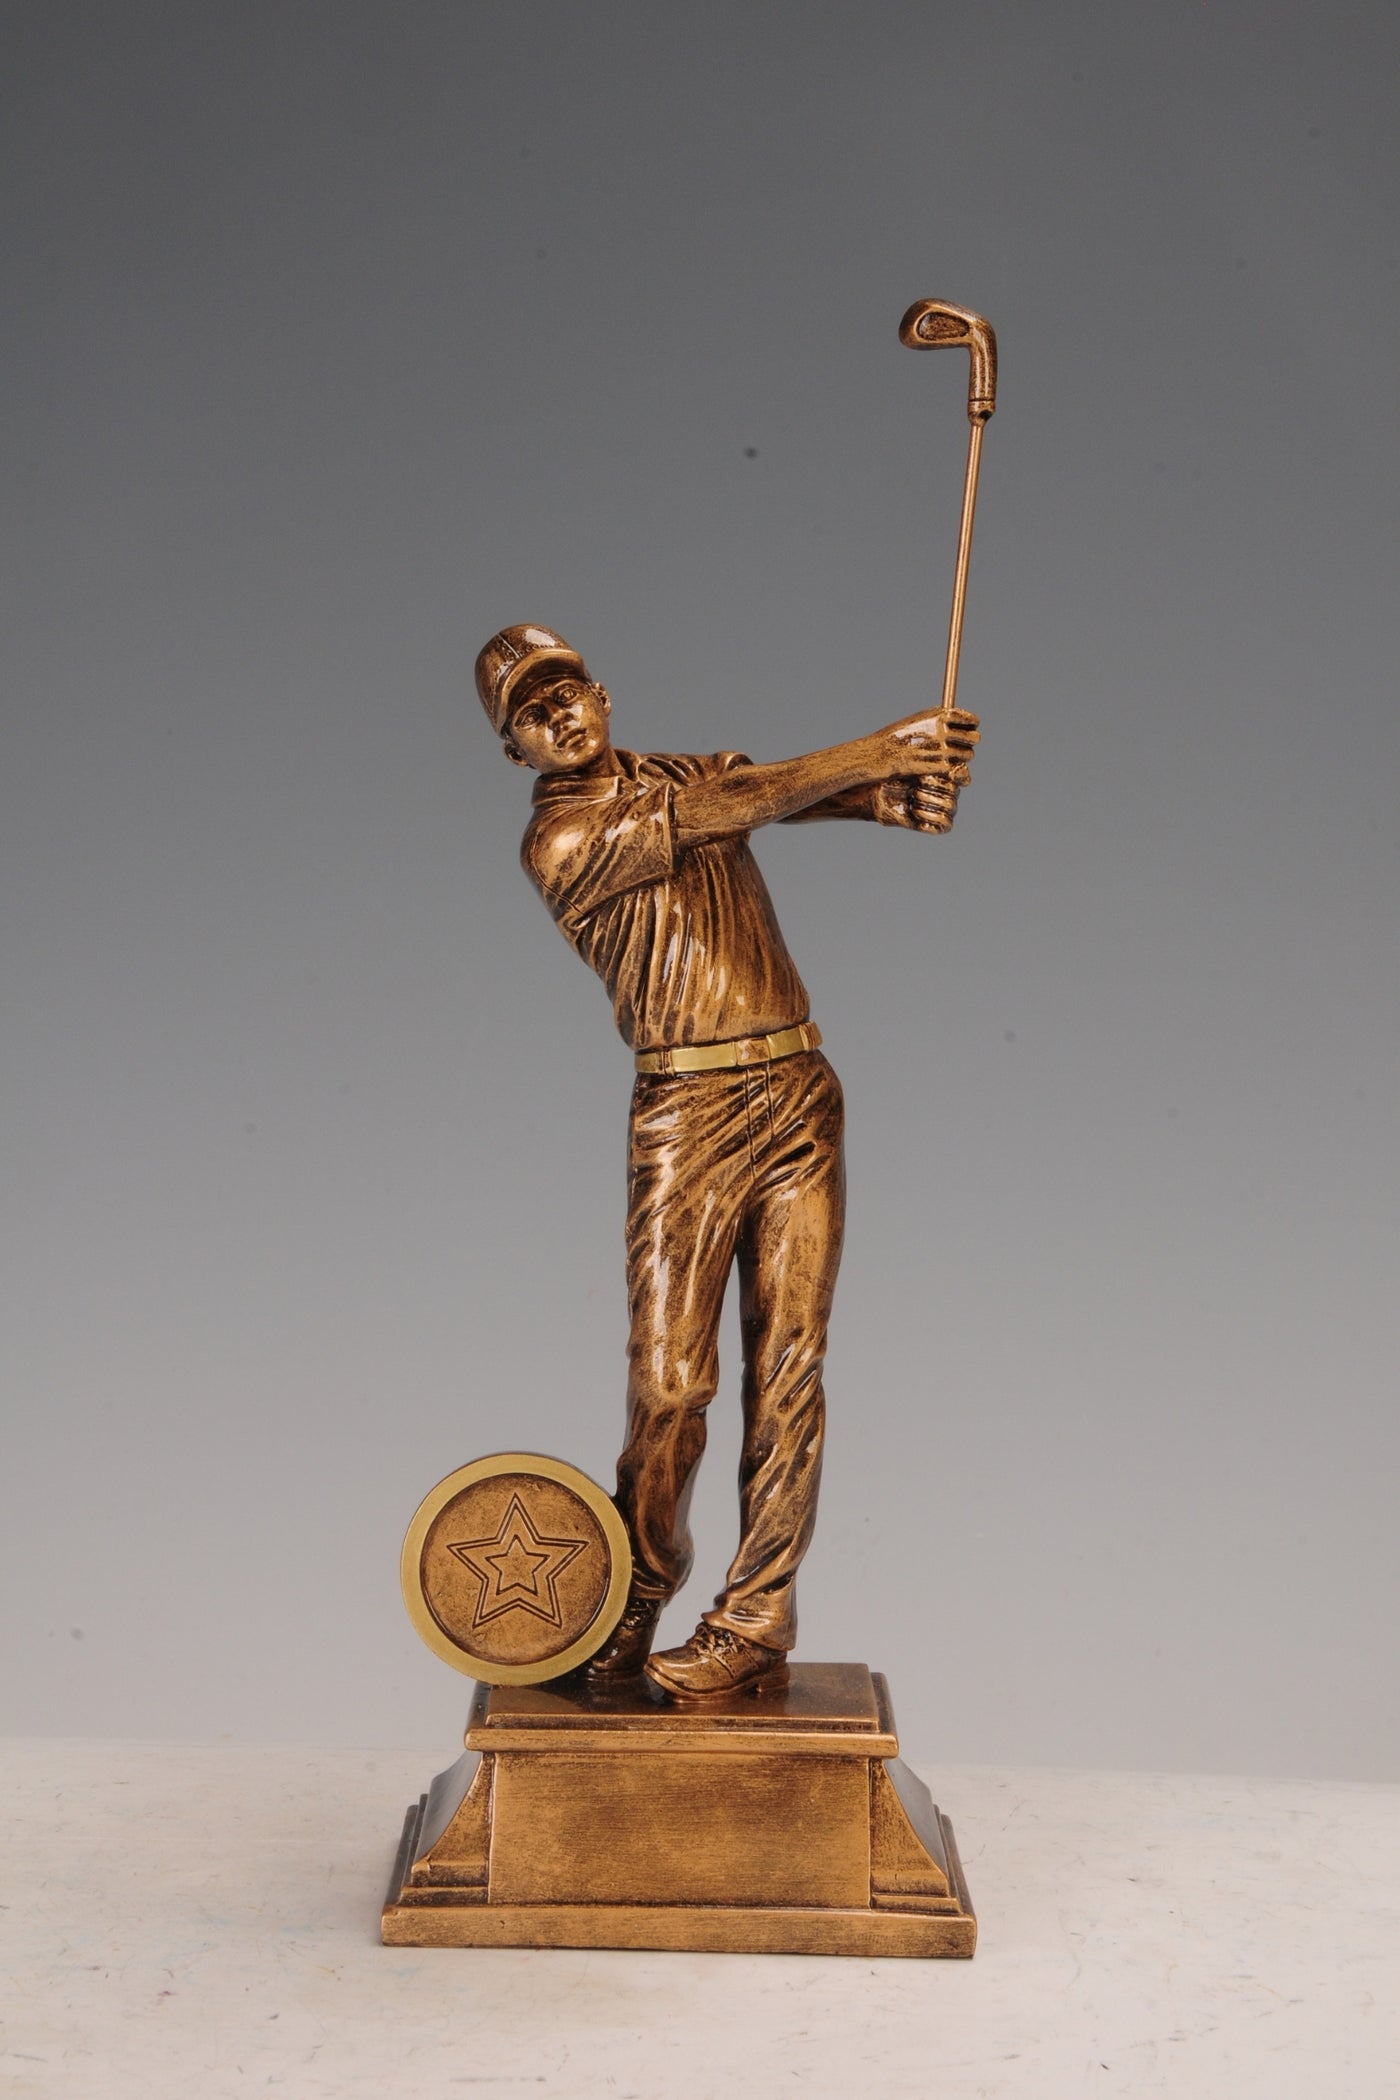 Perfect Swing' Professional Golfer Swinging Golf Club Statue for your home or office decor